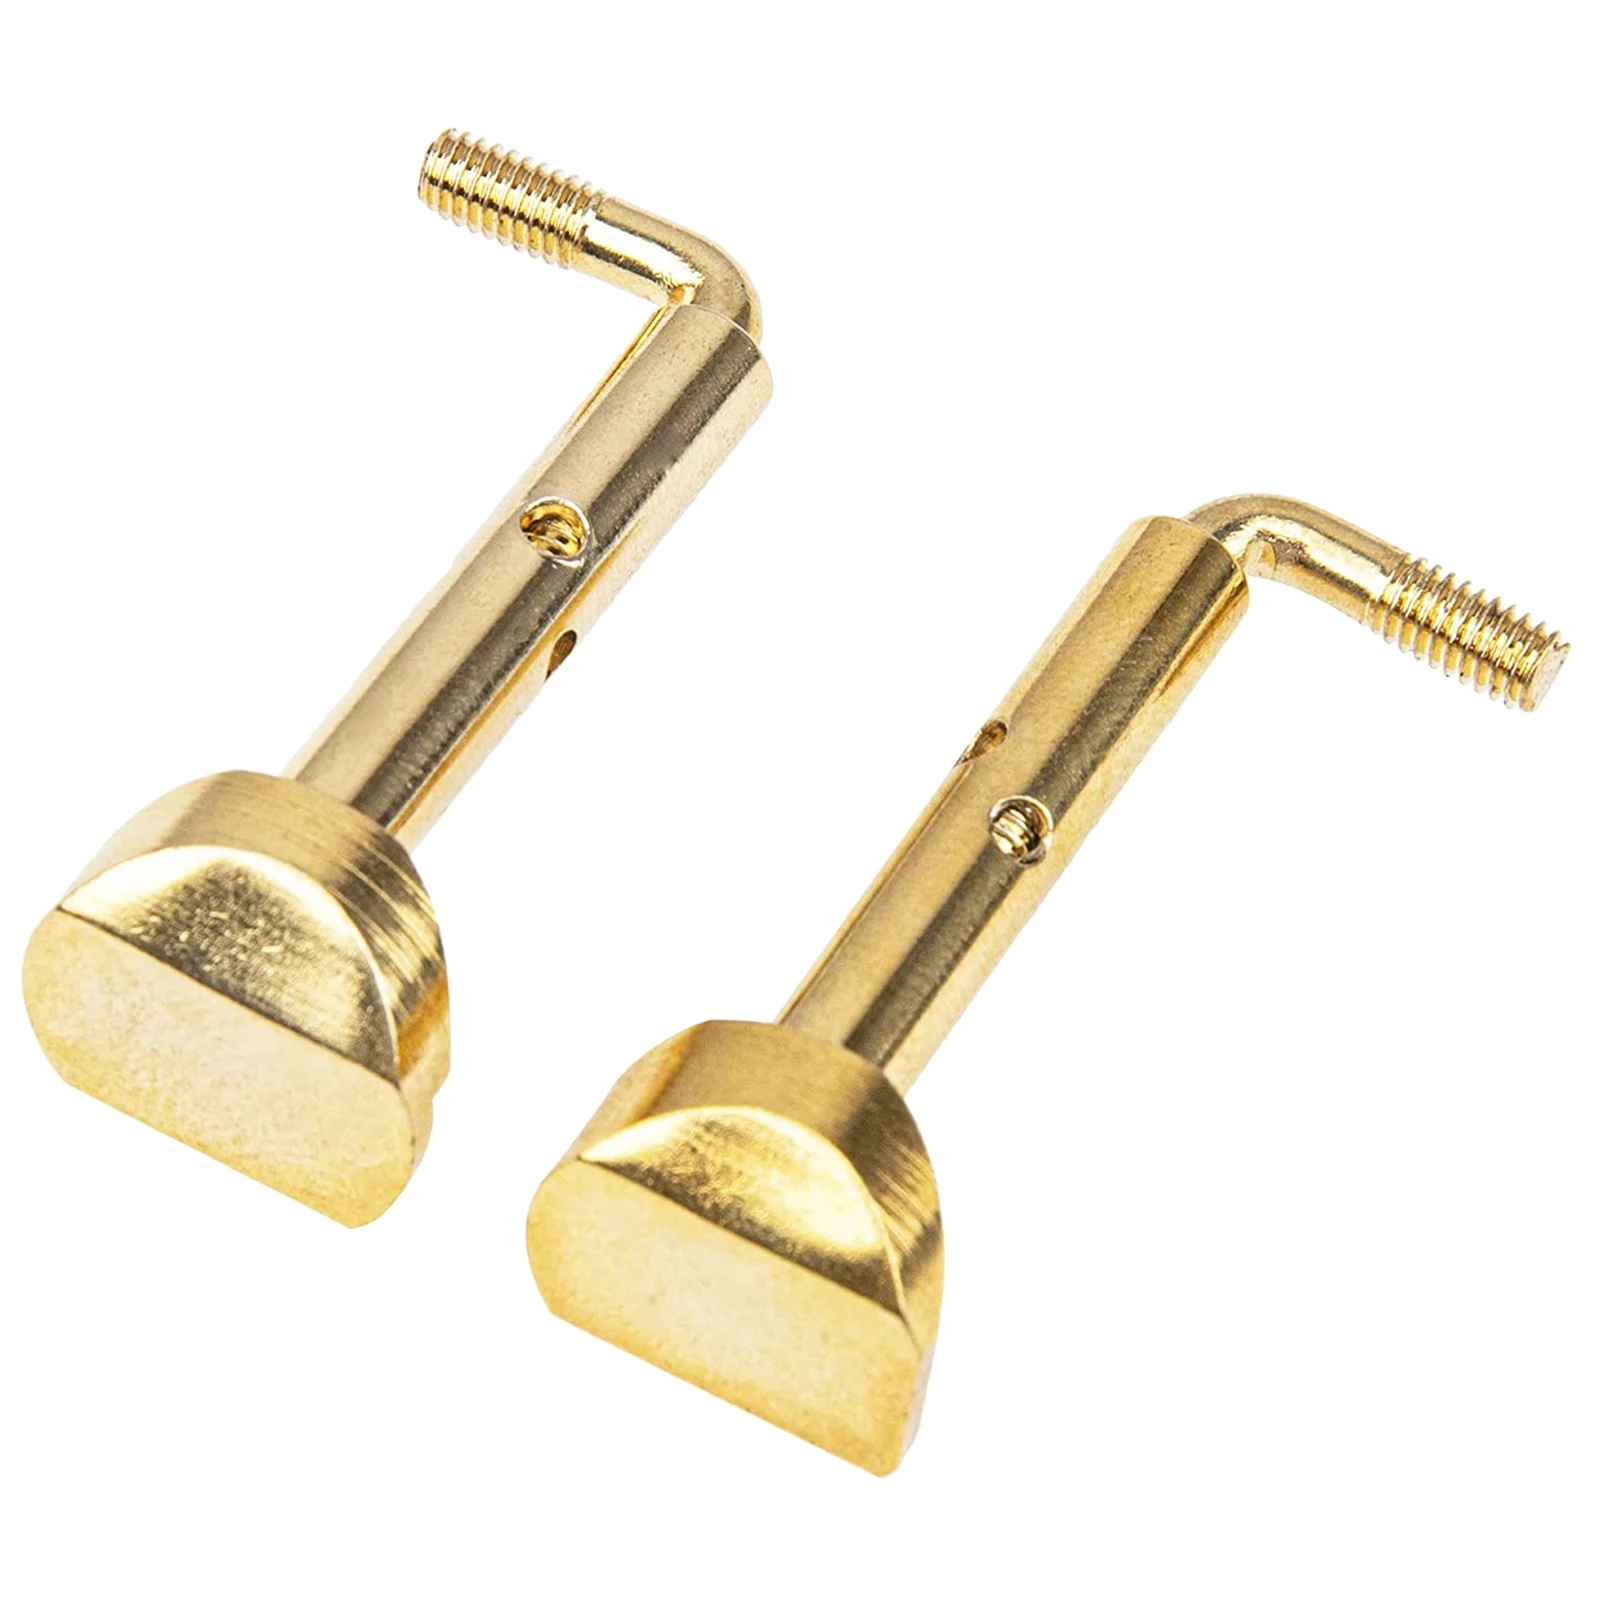 

2Pcs Alloy Violin Chinrest Screws Violin Chin Rest Clamps Accessories for 4/4 3/4 Violin